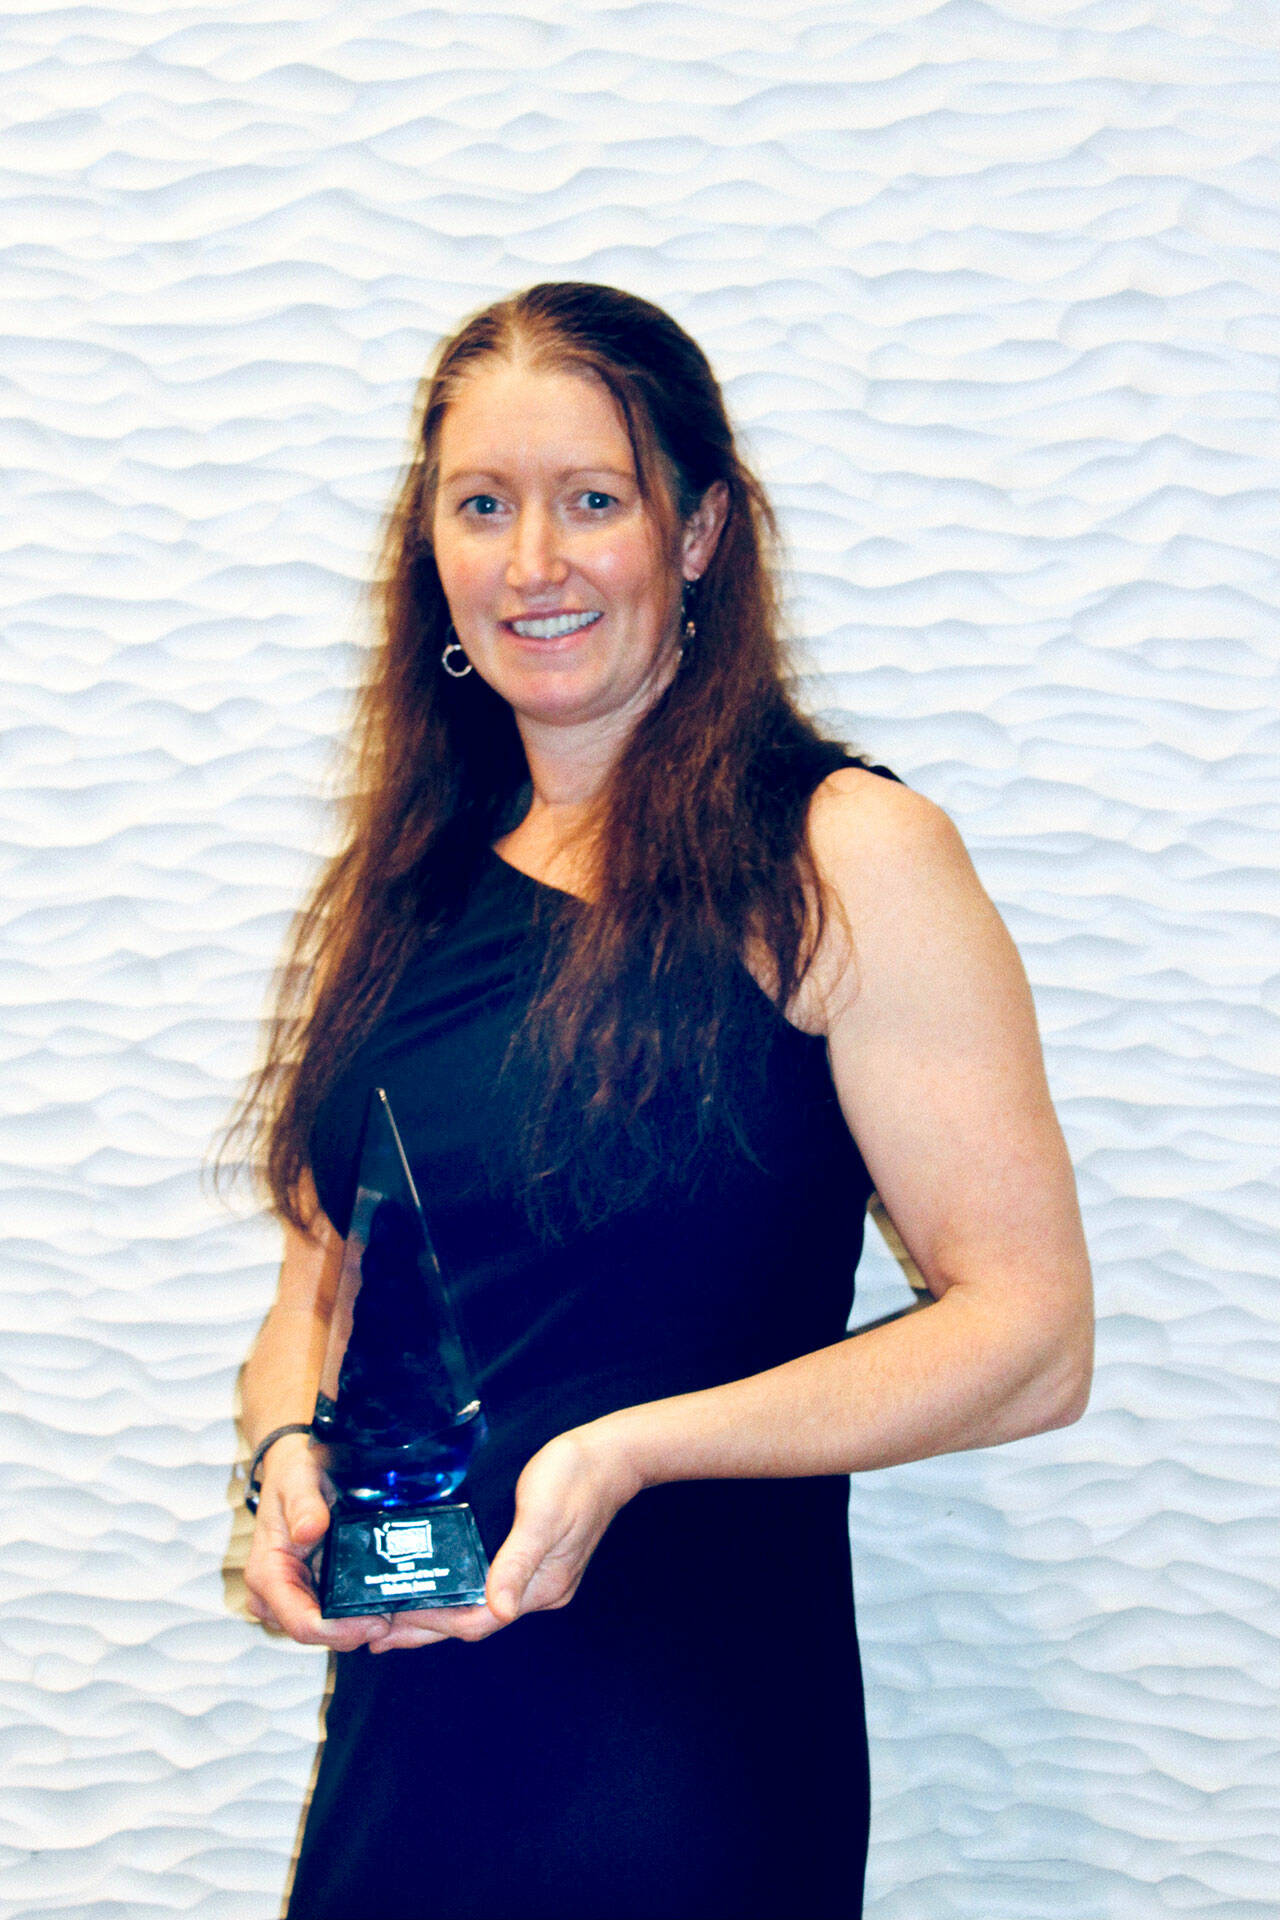 Victoria Jones, race director of the Port Angeles Marathon Association, displays the 2021 Washington State Event Organizer of the year award she was given by the Washington Festivals & Events Association.